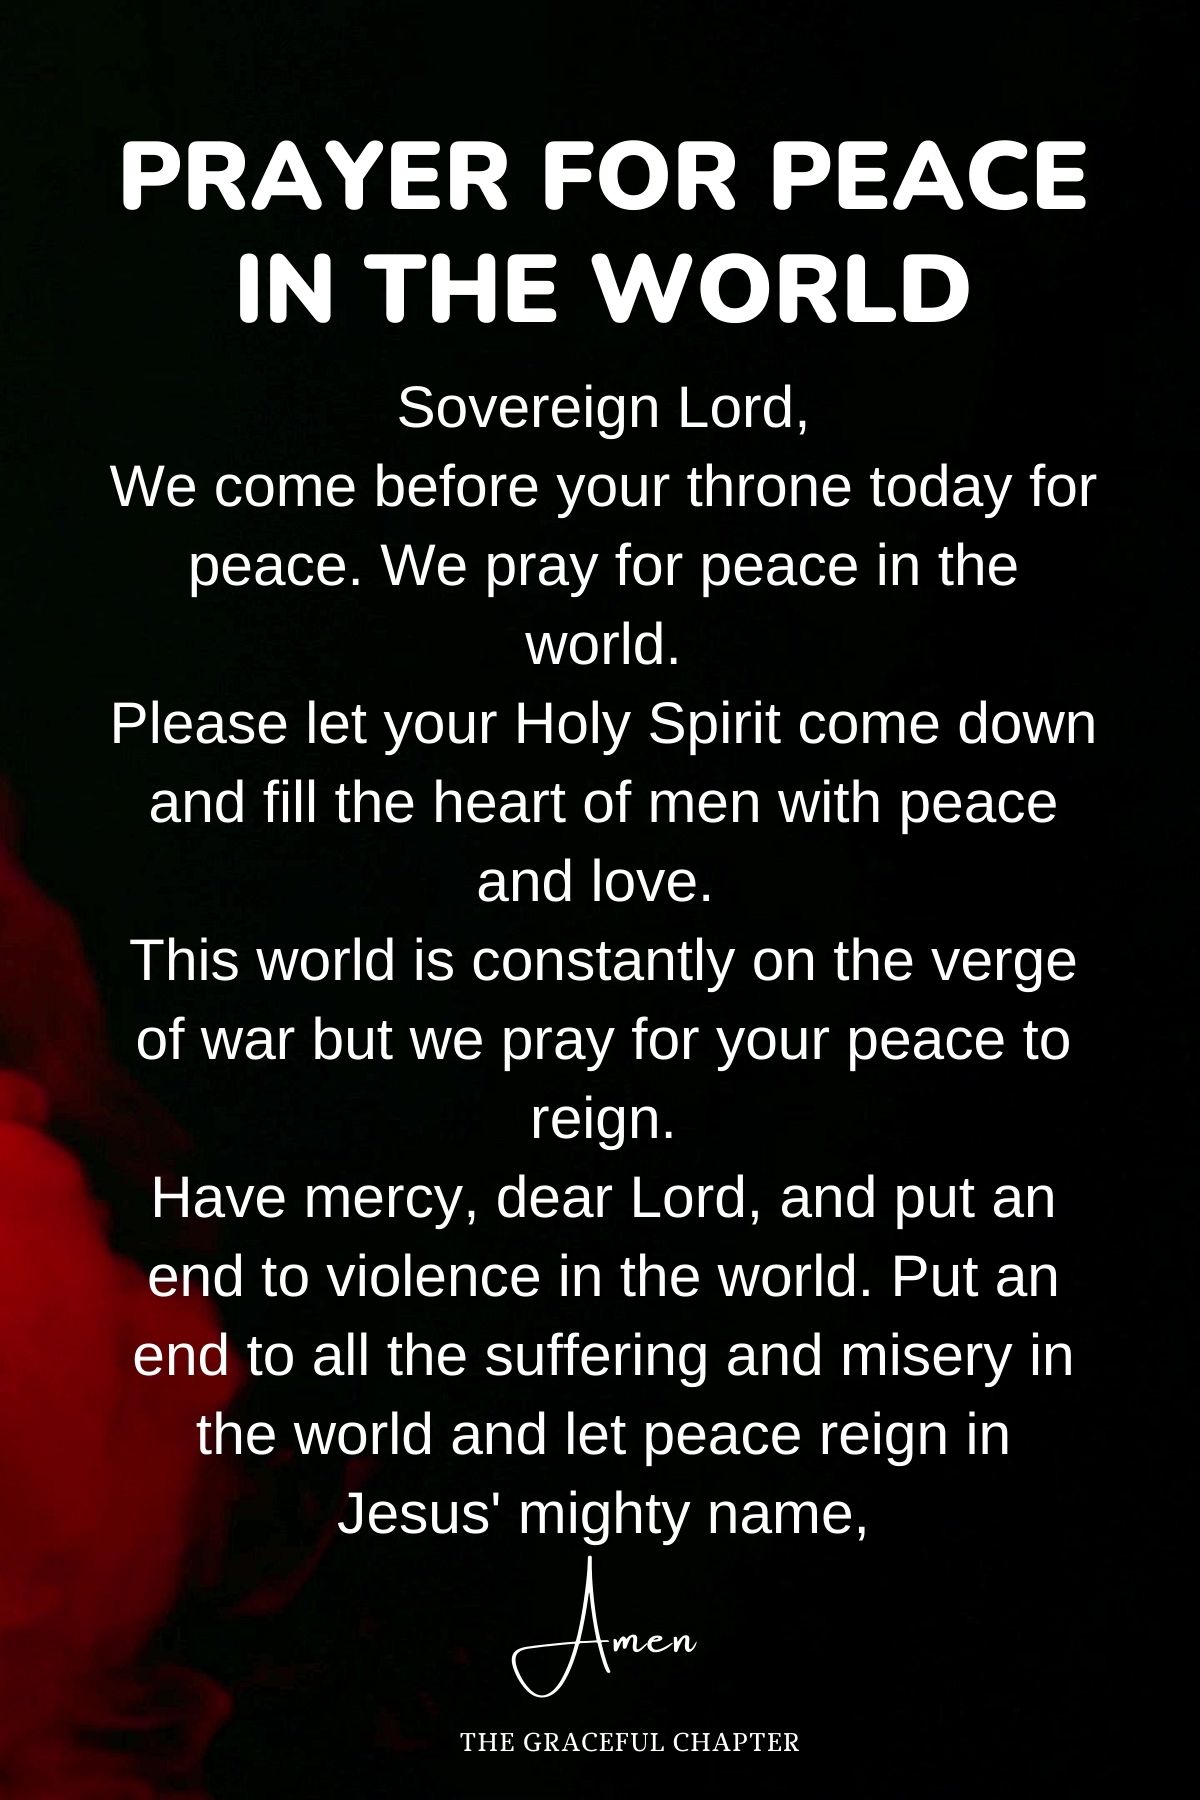 Prayer to end terror and violence in the world